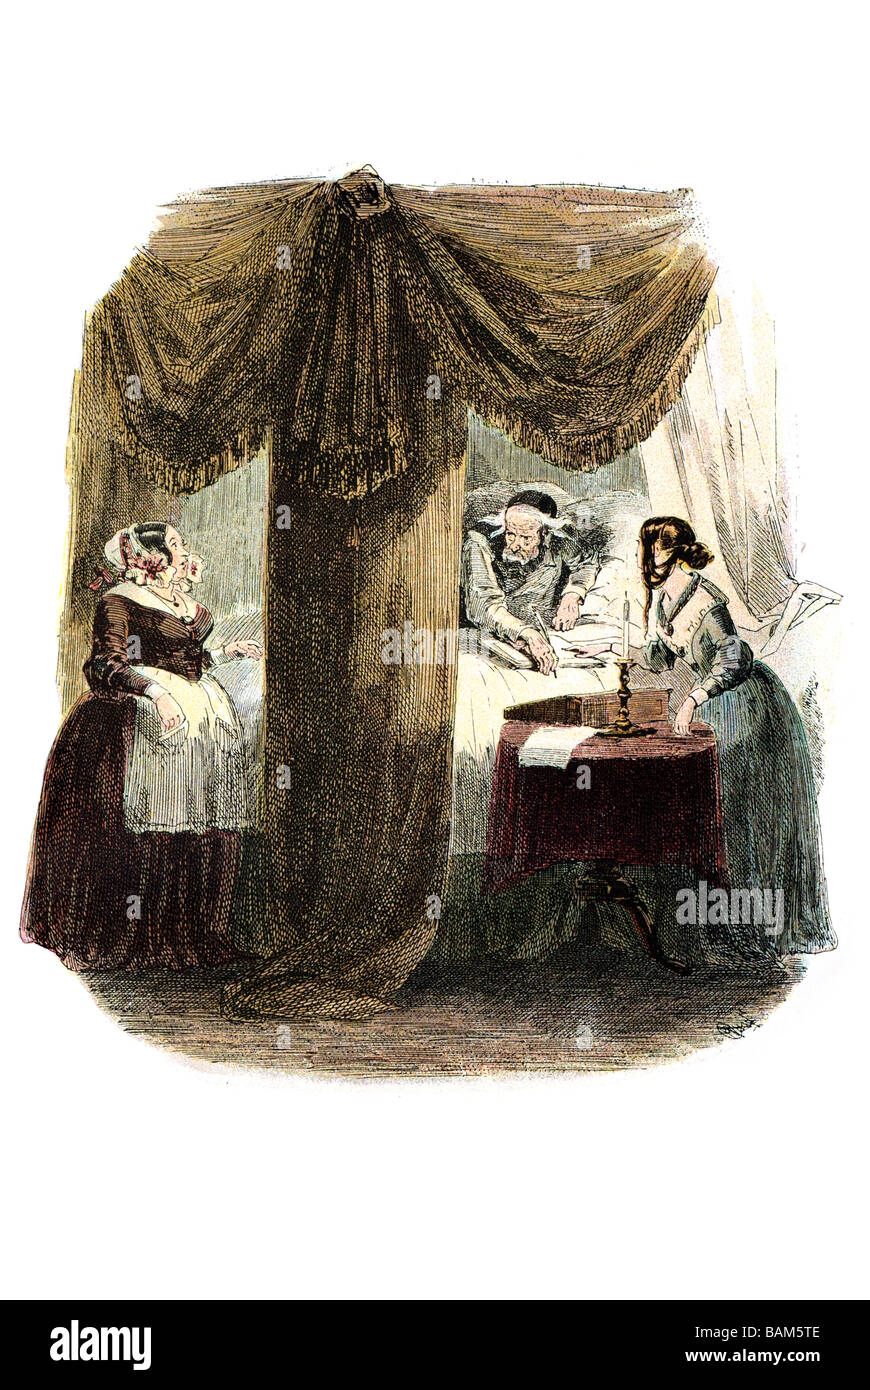 martin chuzzlewit suspects the landlady without any reason The Life and Adventures of Martin Chuzzlewit charles dickens Stock Photo